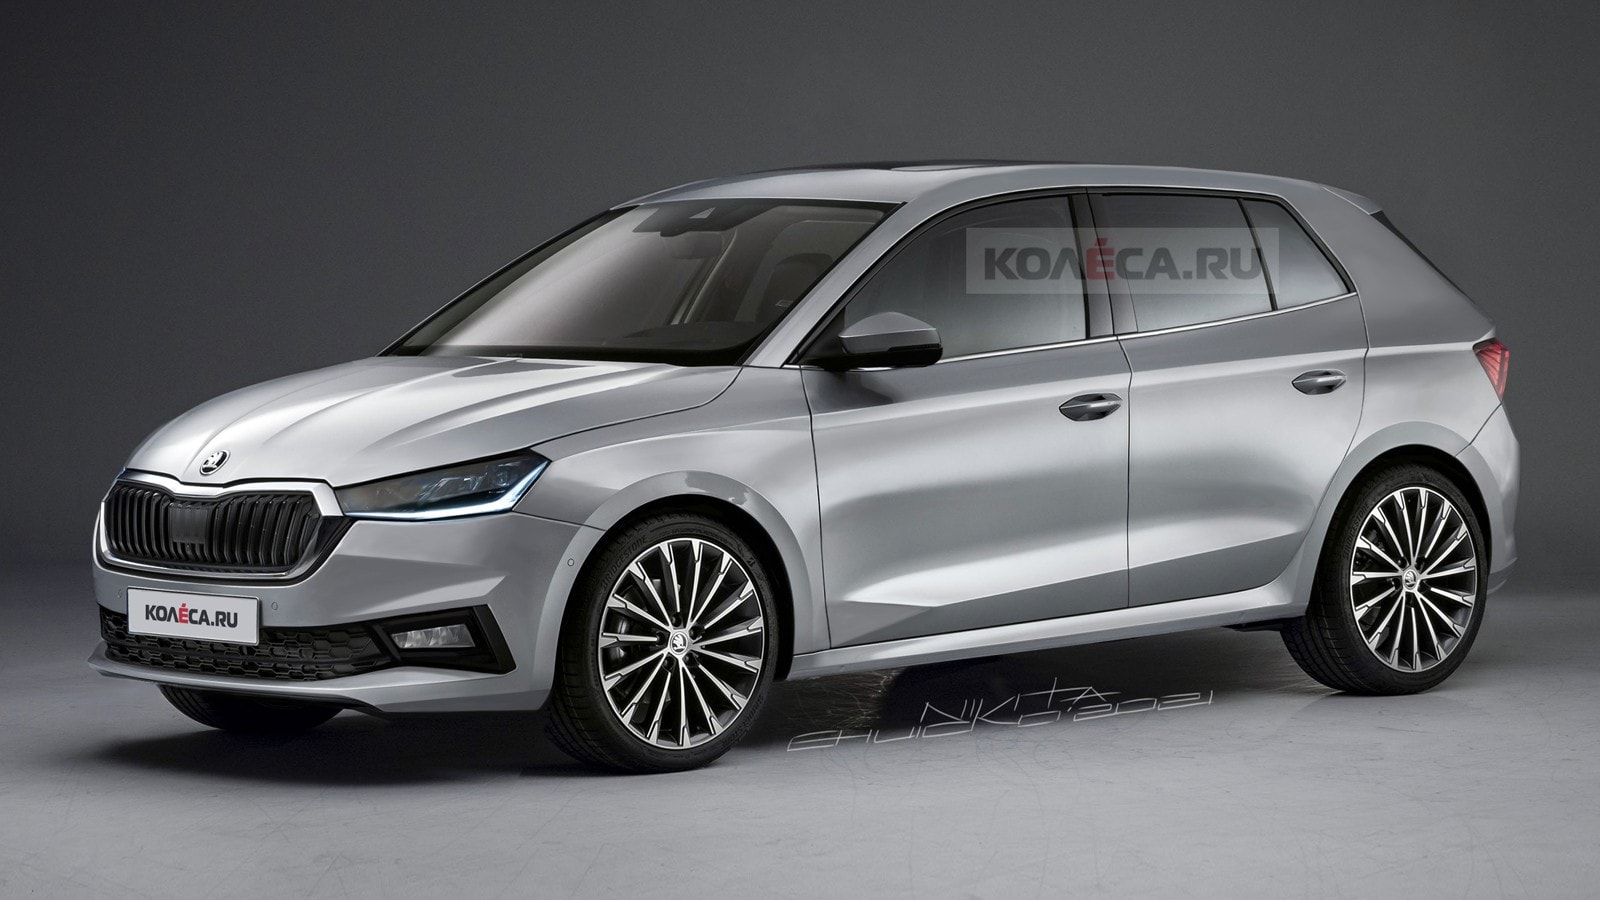 2022 Skoda Fabia Gets Realistically Rendered Ahead of Debut, but Will It  Sell? - autoevolution